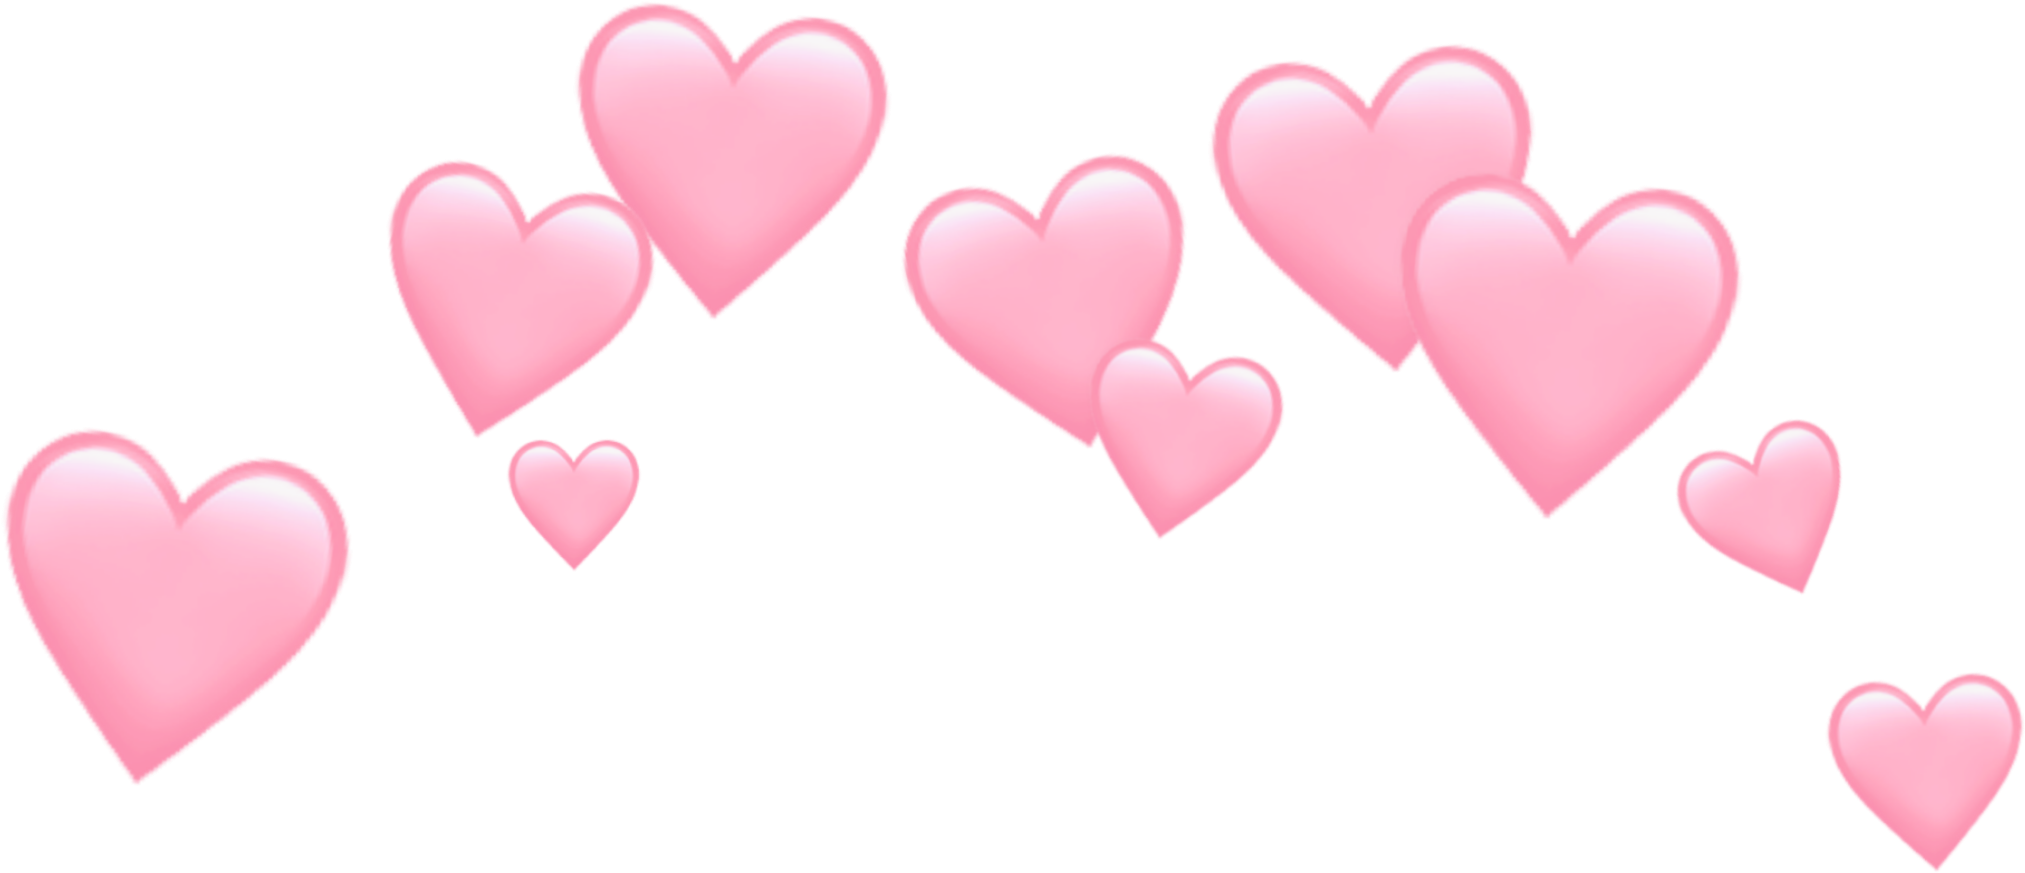 Heart Crown PNG Images HD